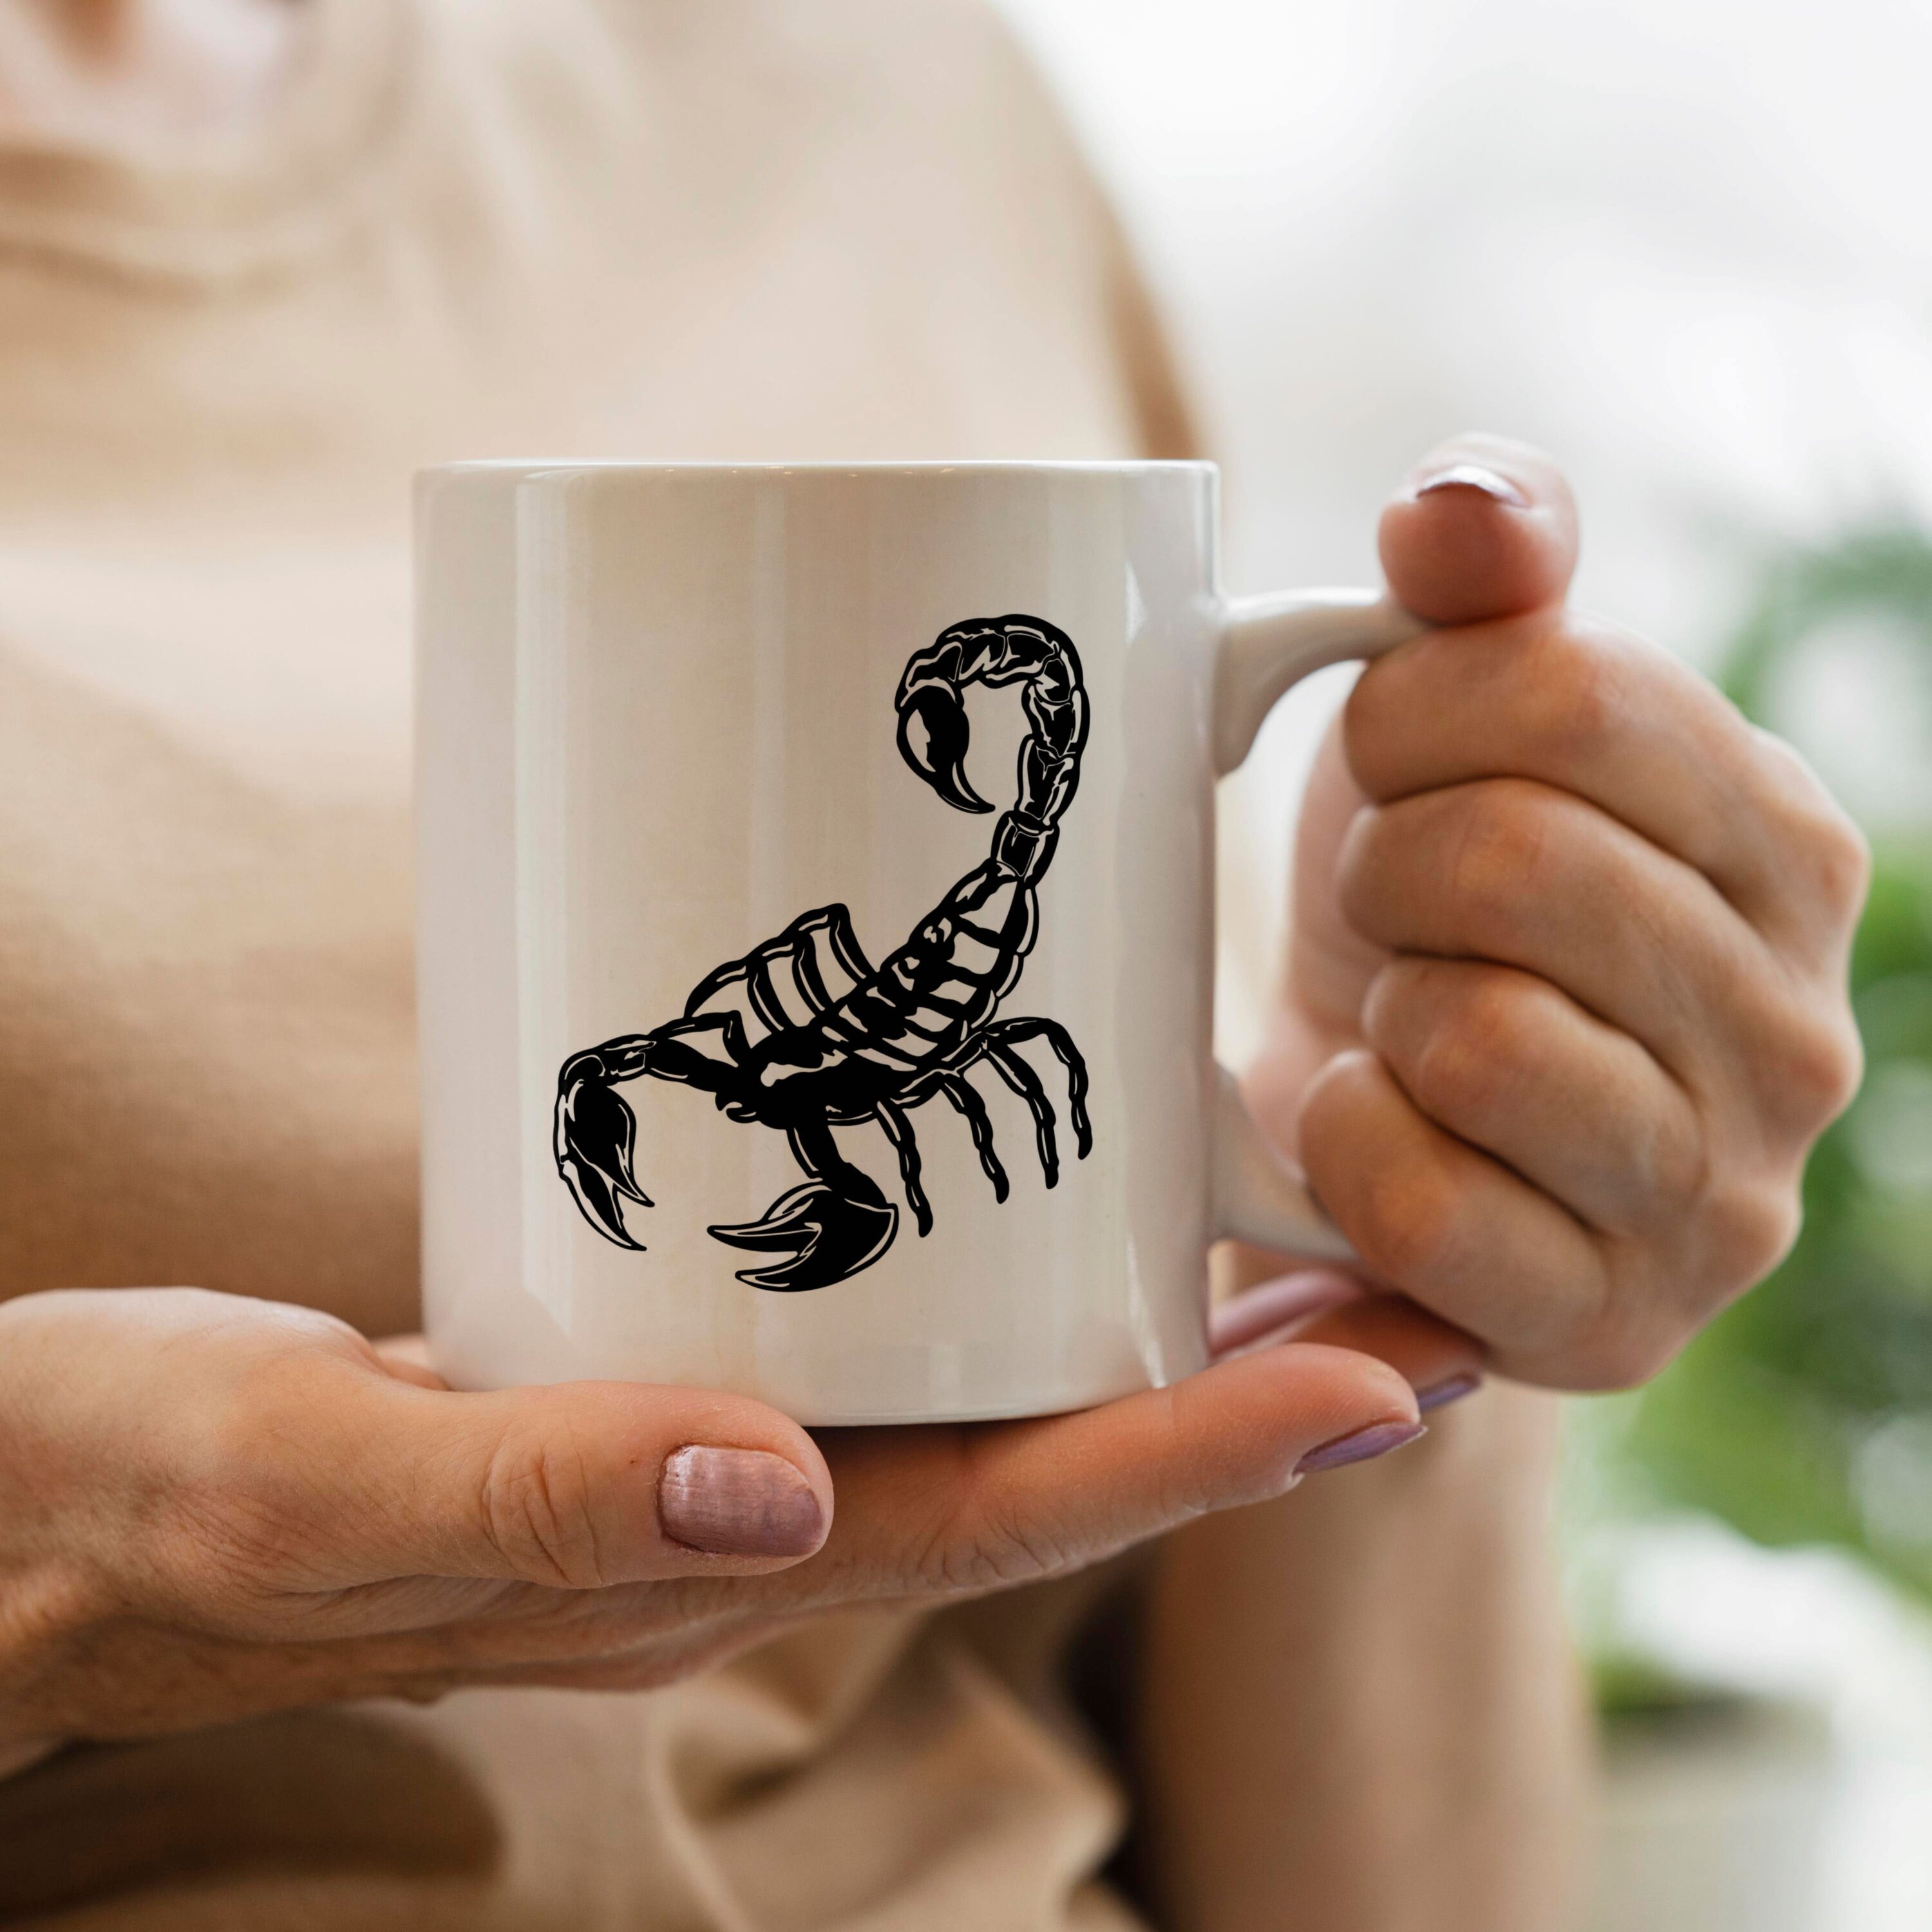 Woman holding a coffee mug with a scorpion on it.